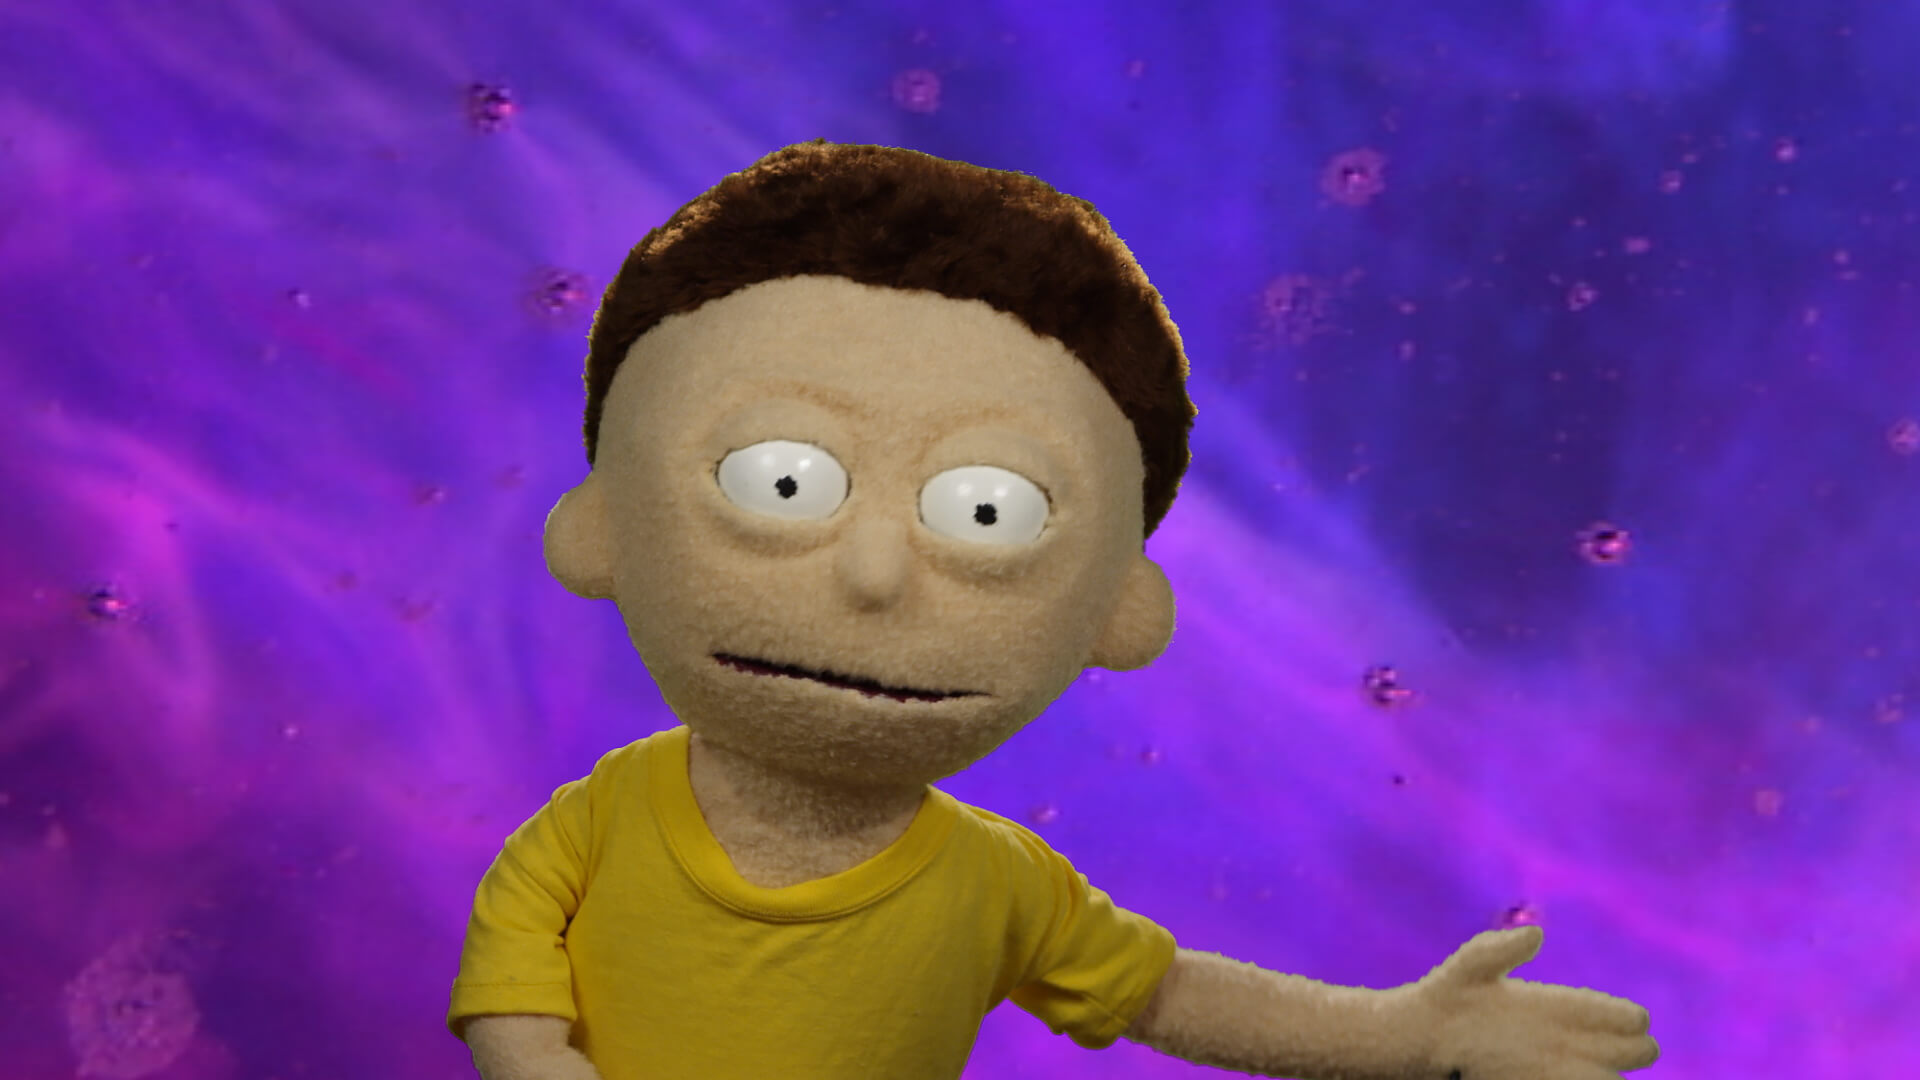 Morty Smith puppet from the Rick and Morty Blu-ray commercial shot and edited by Todd Bishop